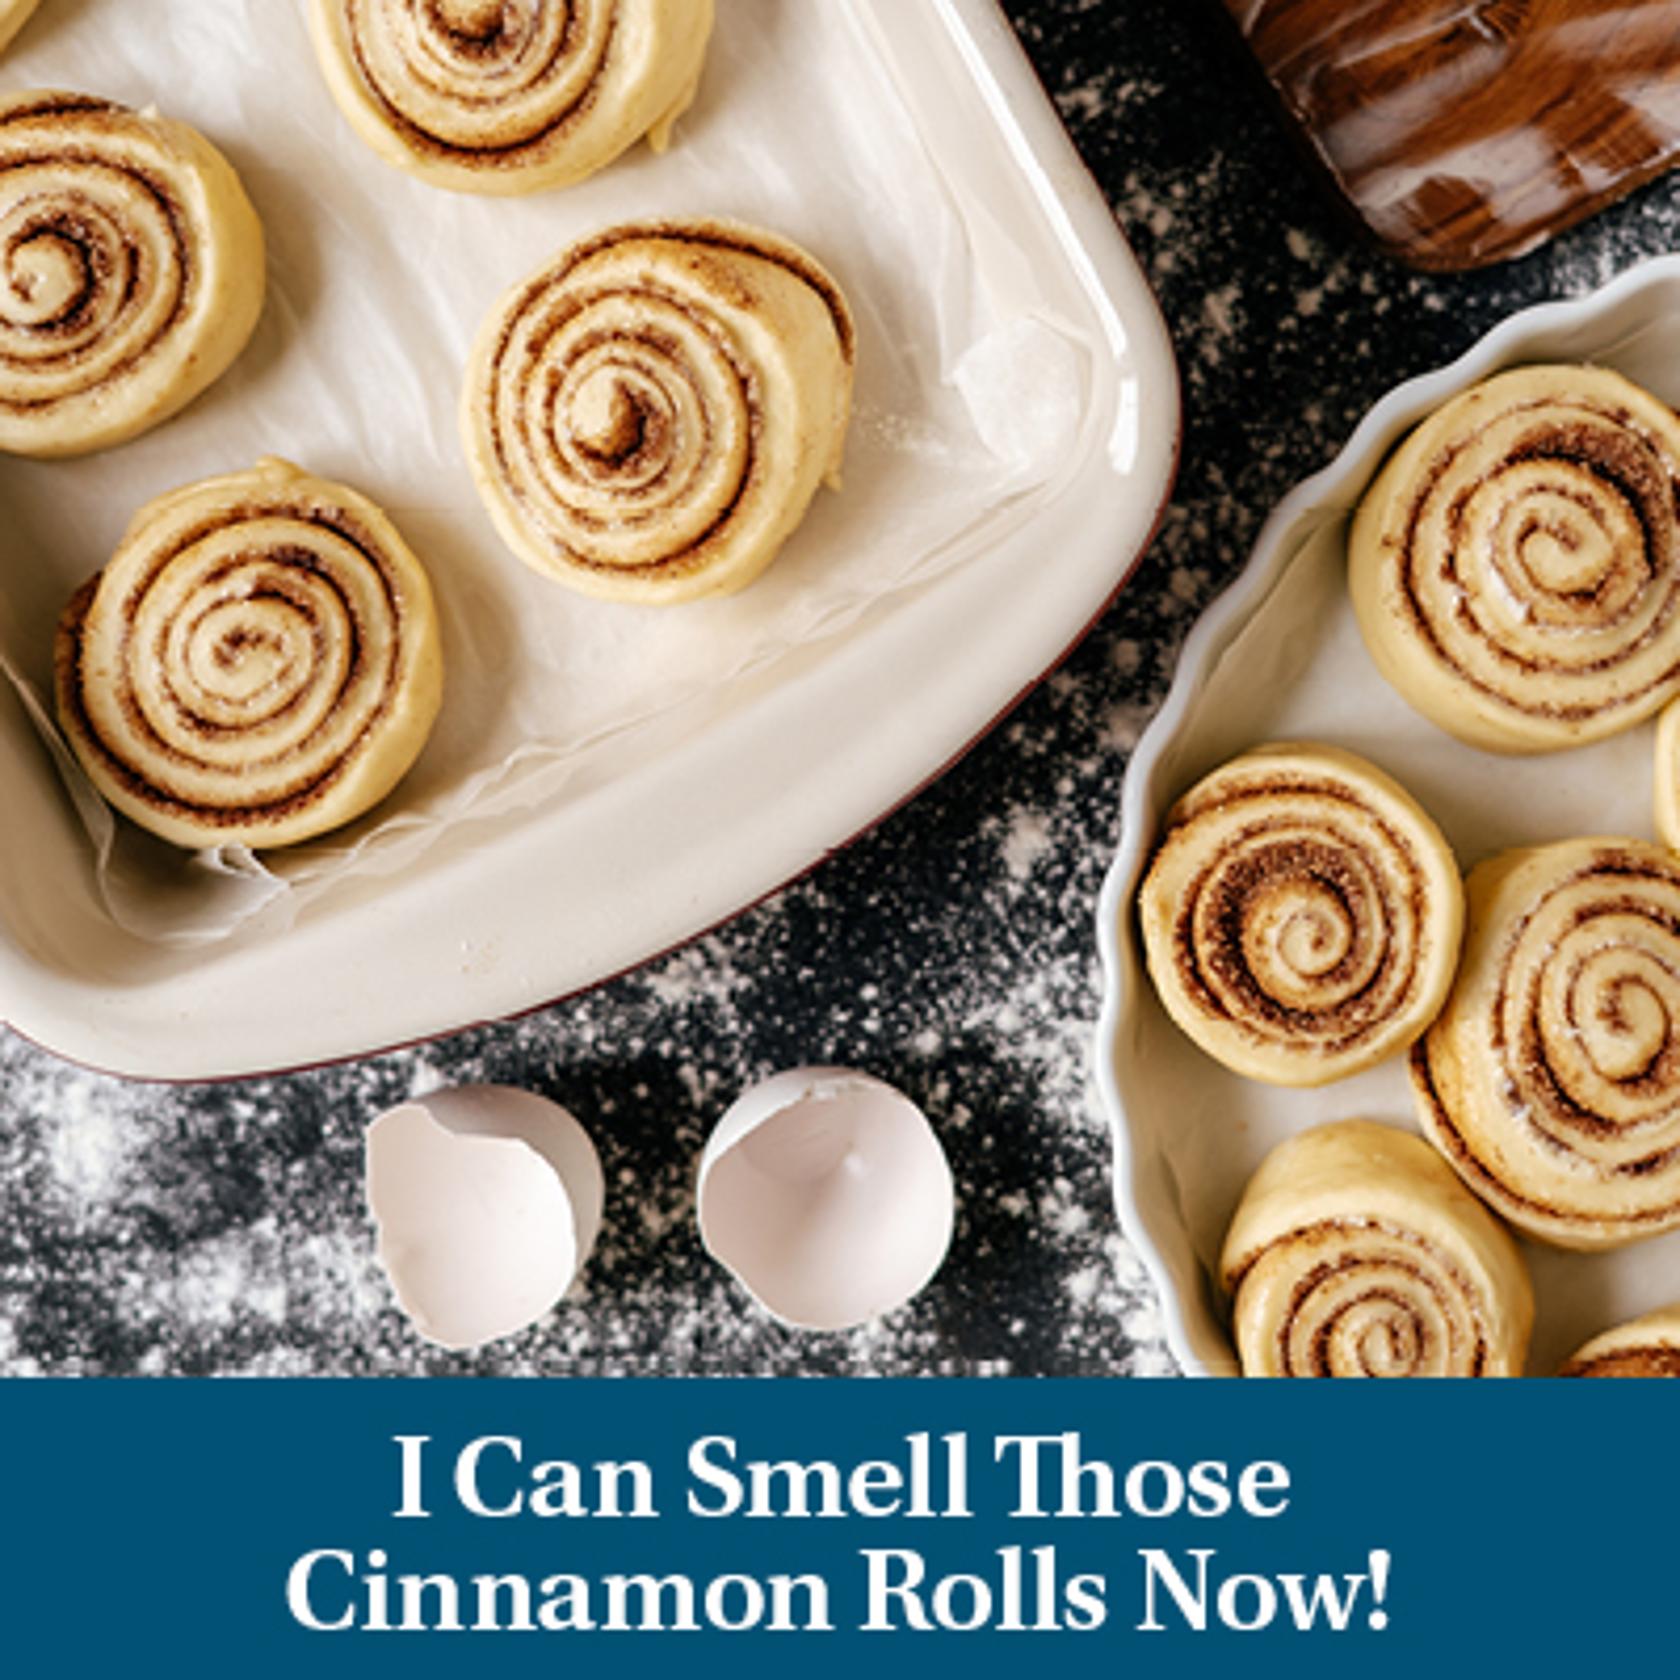 I Can Smell Those Cinnamon Rolls Now!